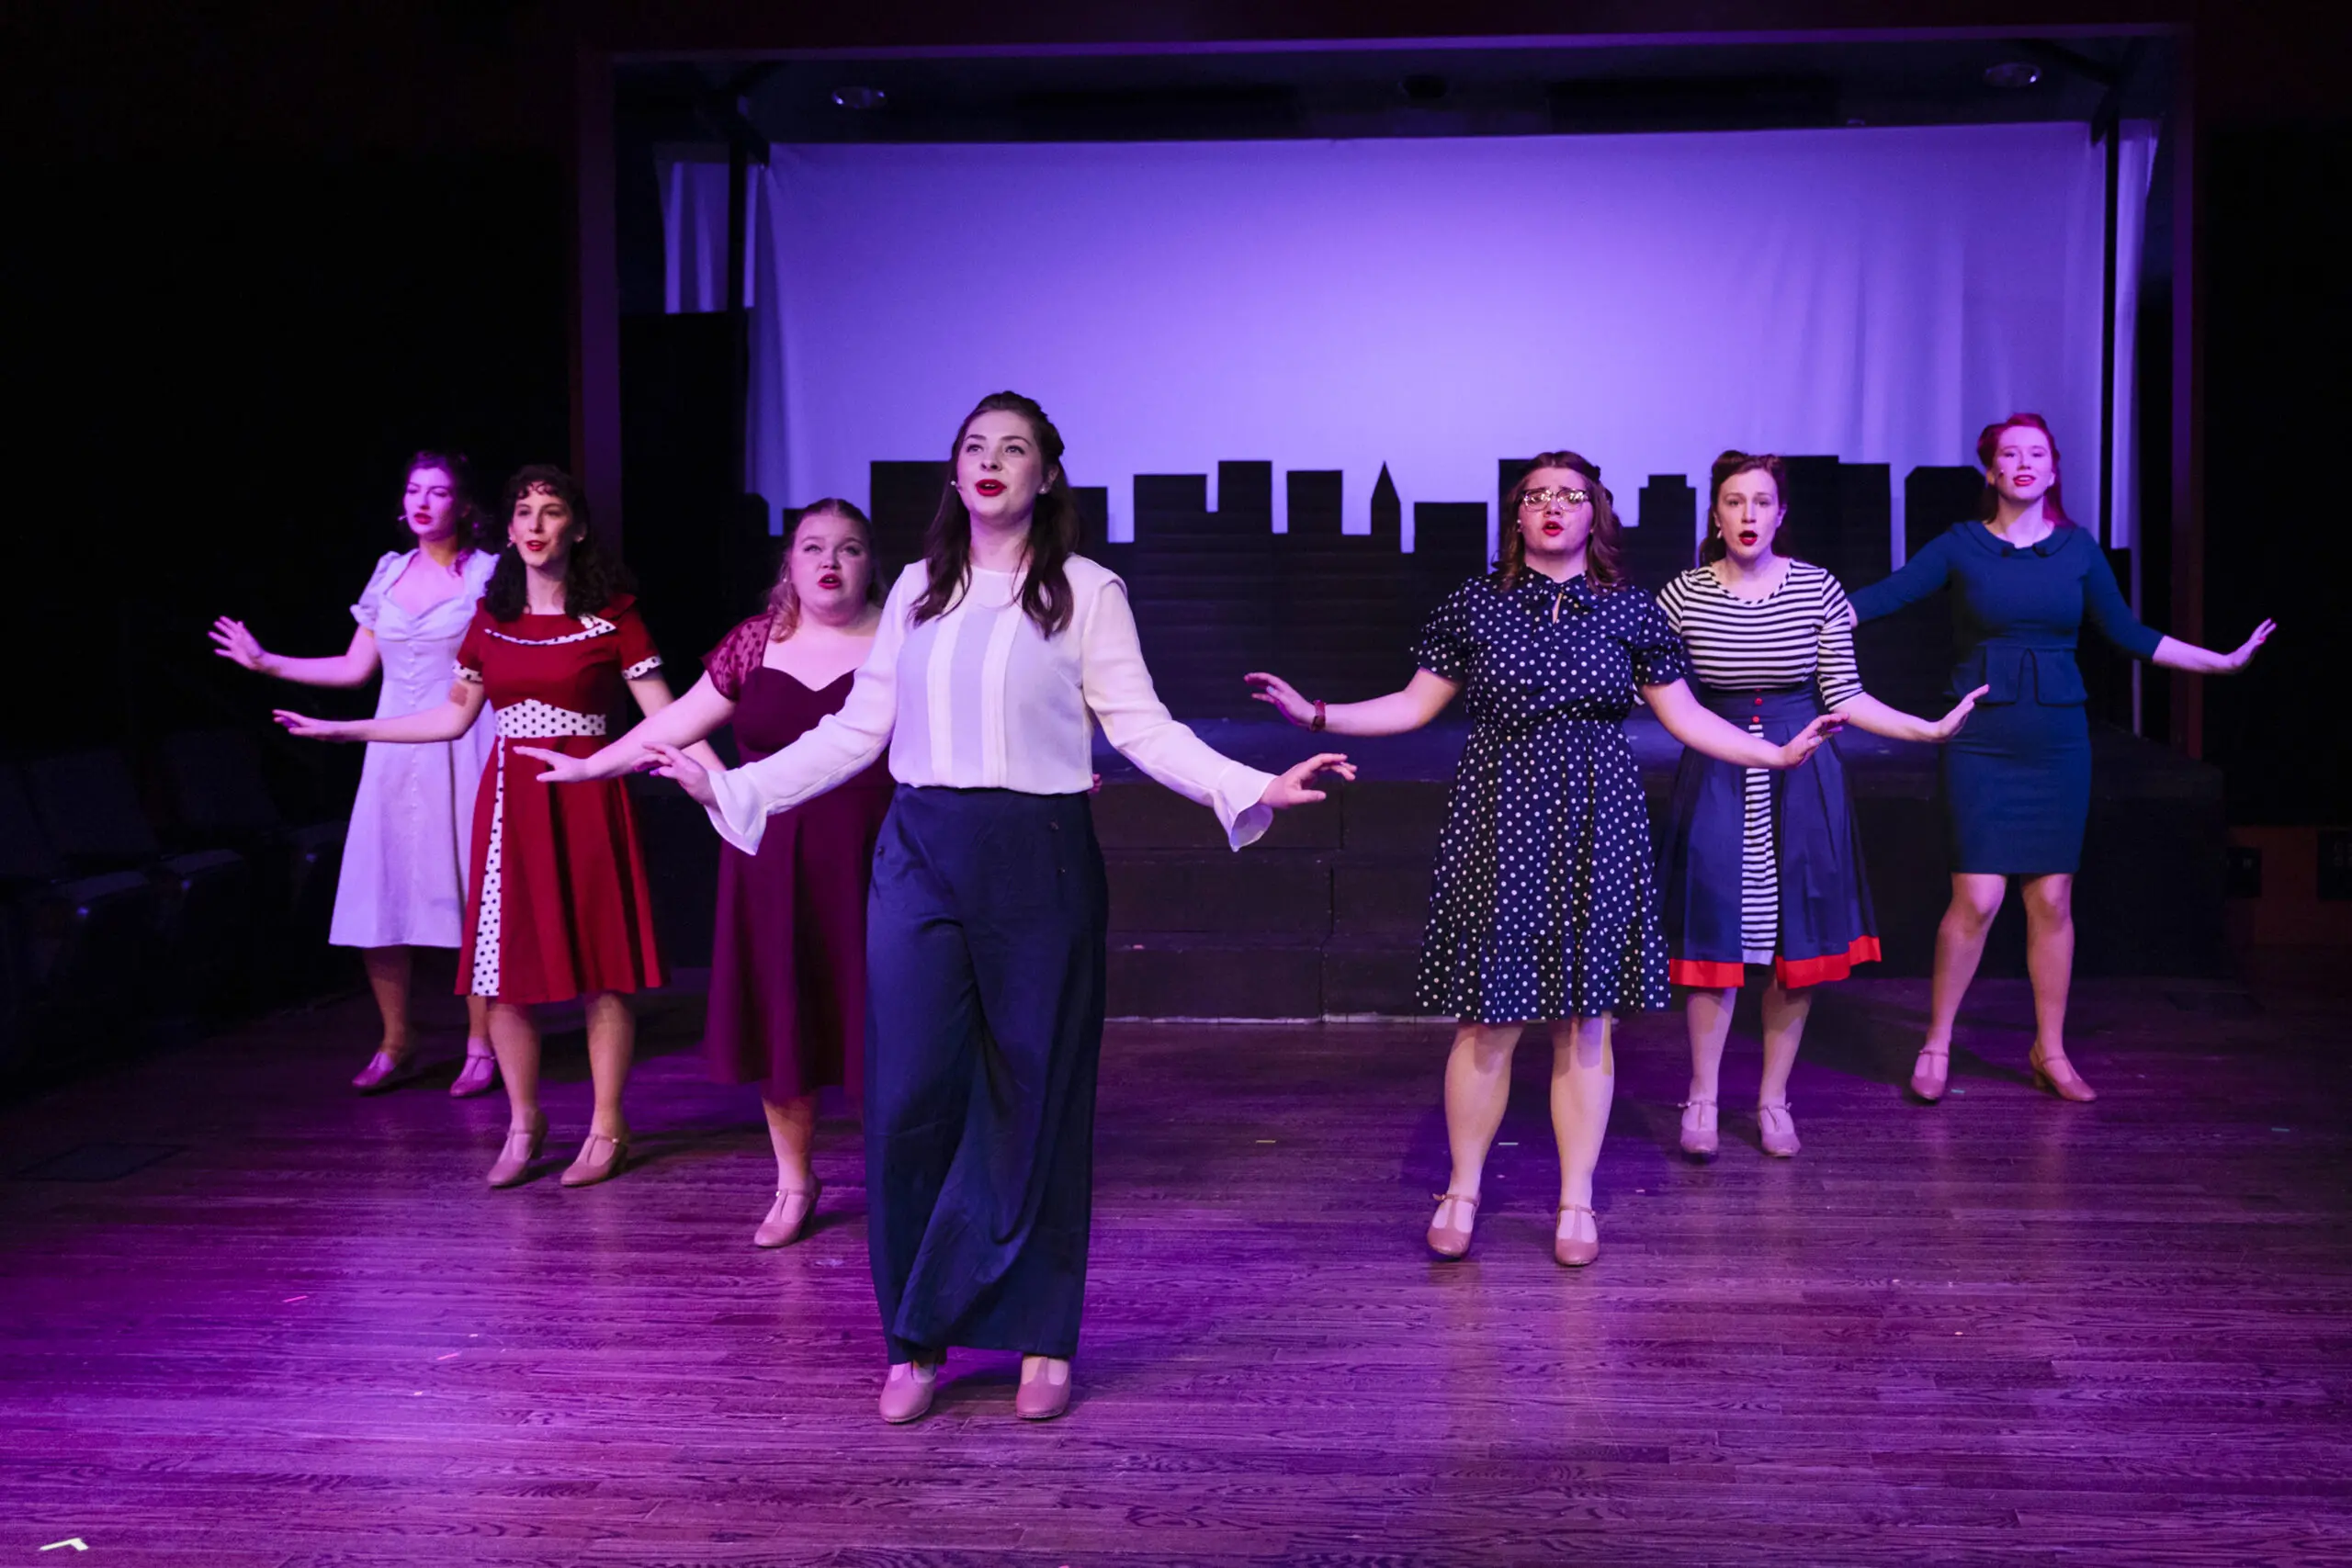 LVC Music Theater members perform on stage during production of "On The Town"